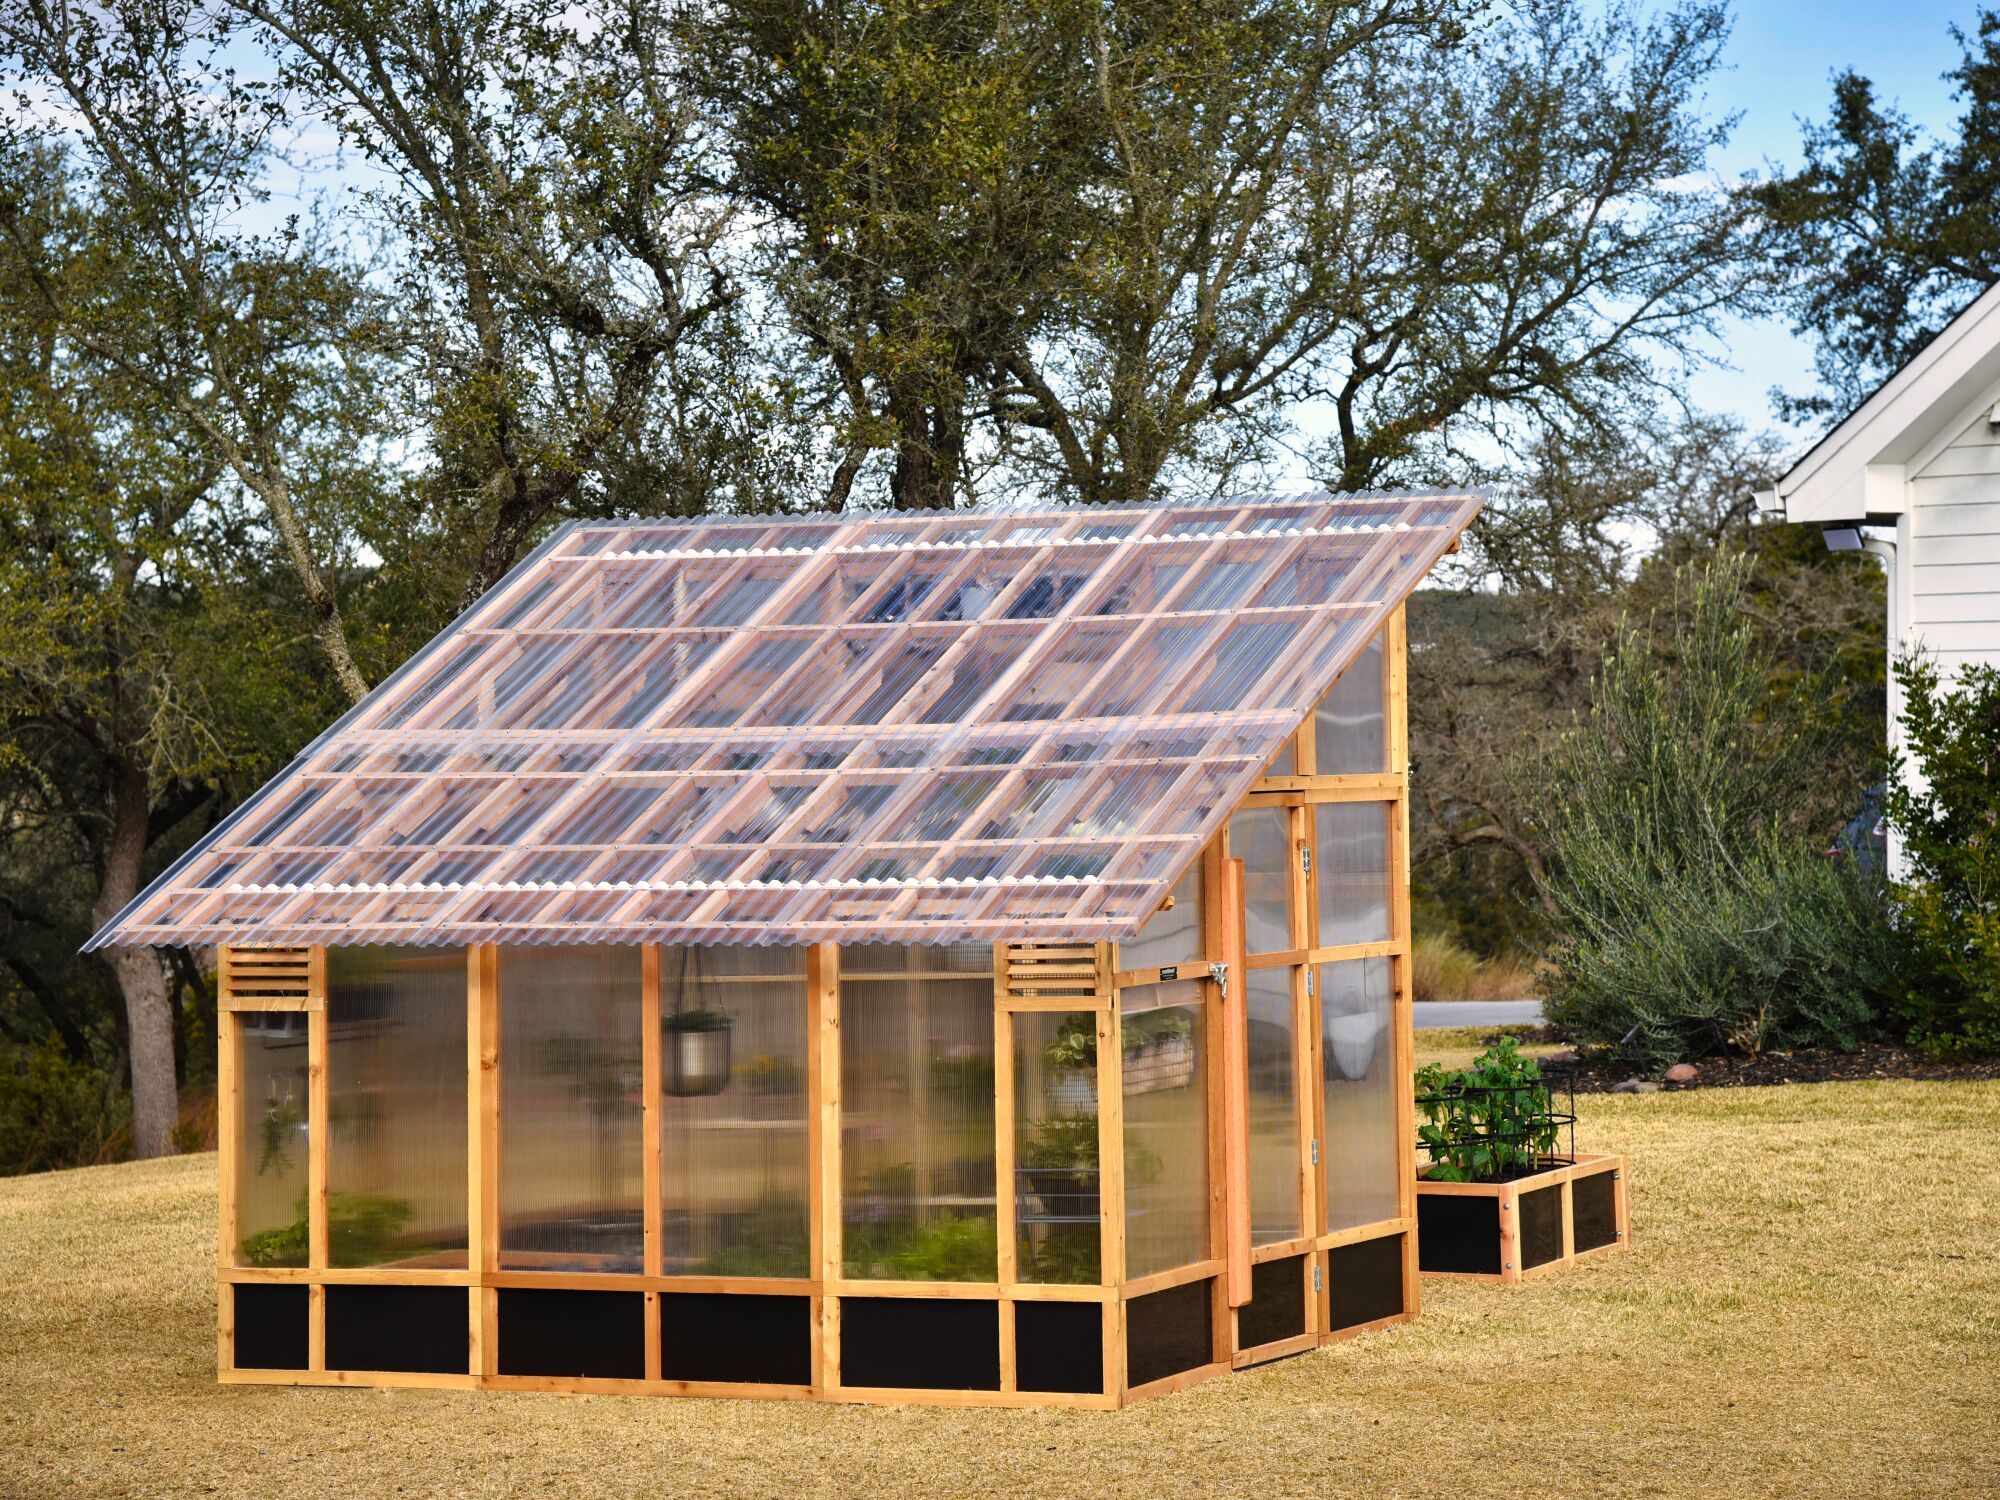 Slant-Roof-Greenhouse-Back-Exterior-View